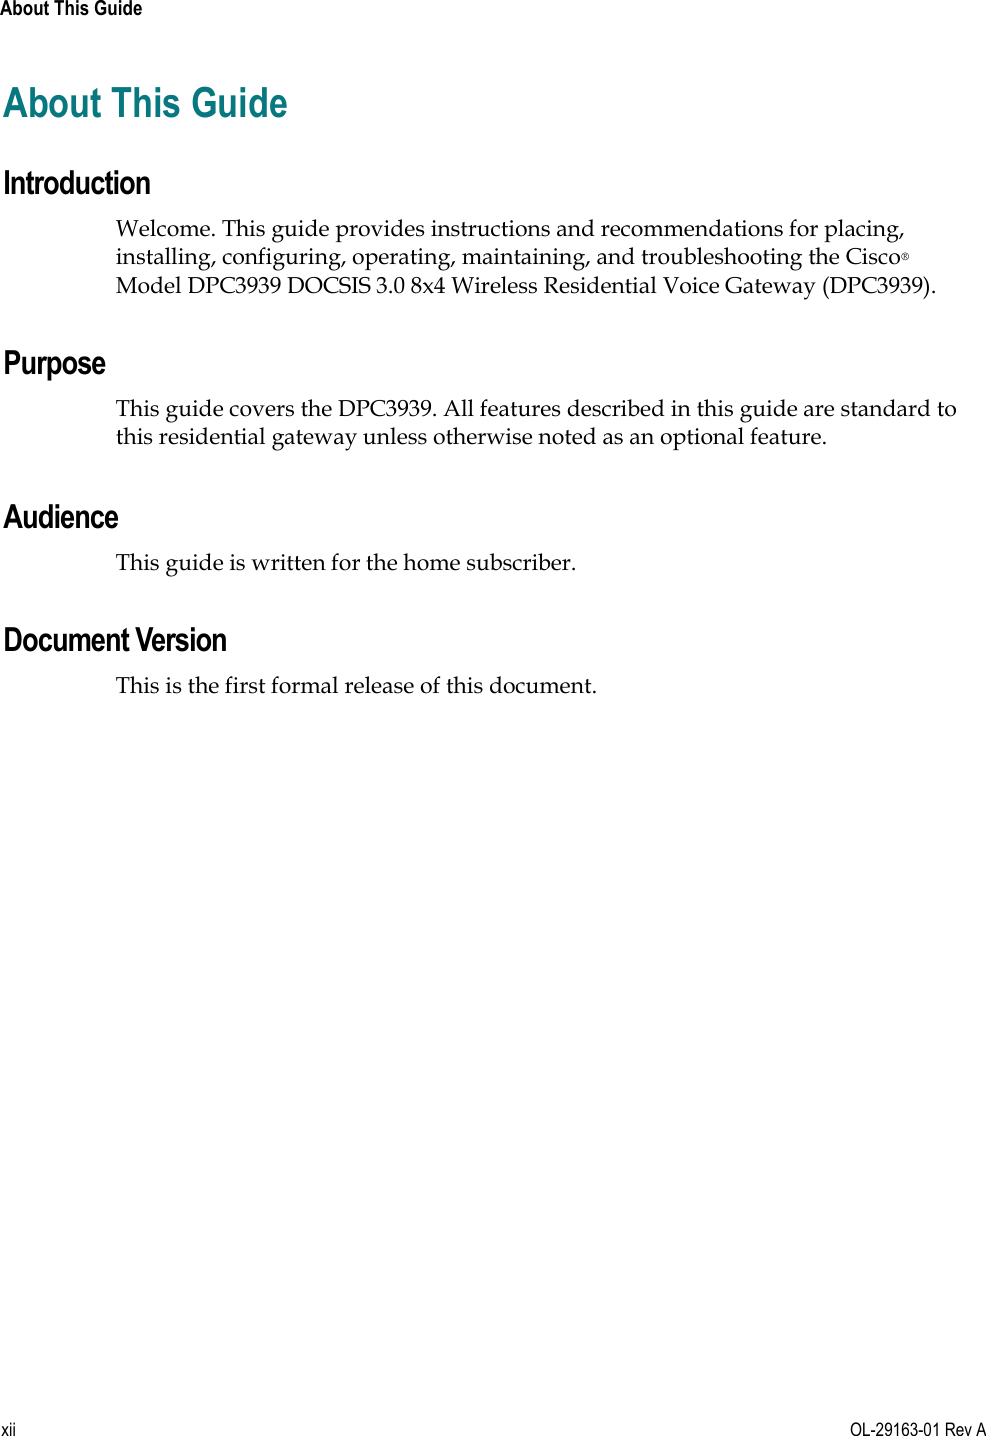  About This Guide xii  OL-29163-01 Rev A About This Guide Introduction Welcome. This guide provides instructions and recommendations for placing, installing, configuring, operating, maintaining, and troubleshooting the Cisco® Model DPC3939 DOCSIS 3.0 8x4 Wireless Residential Voice Gateway (DPC3939).   Purpose This guide covers the DPC3939. All features described in this guide are standard to this residential gateway unless otherwise noted as an optional feature.    Audience This guide is written for the home subscriber.   Document Version This is the first formal release of this document.  